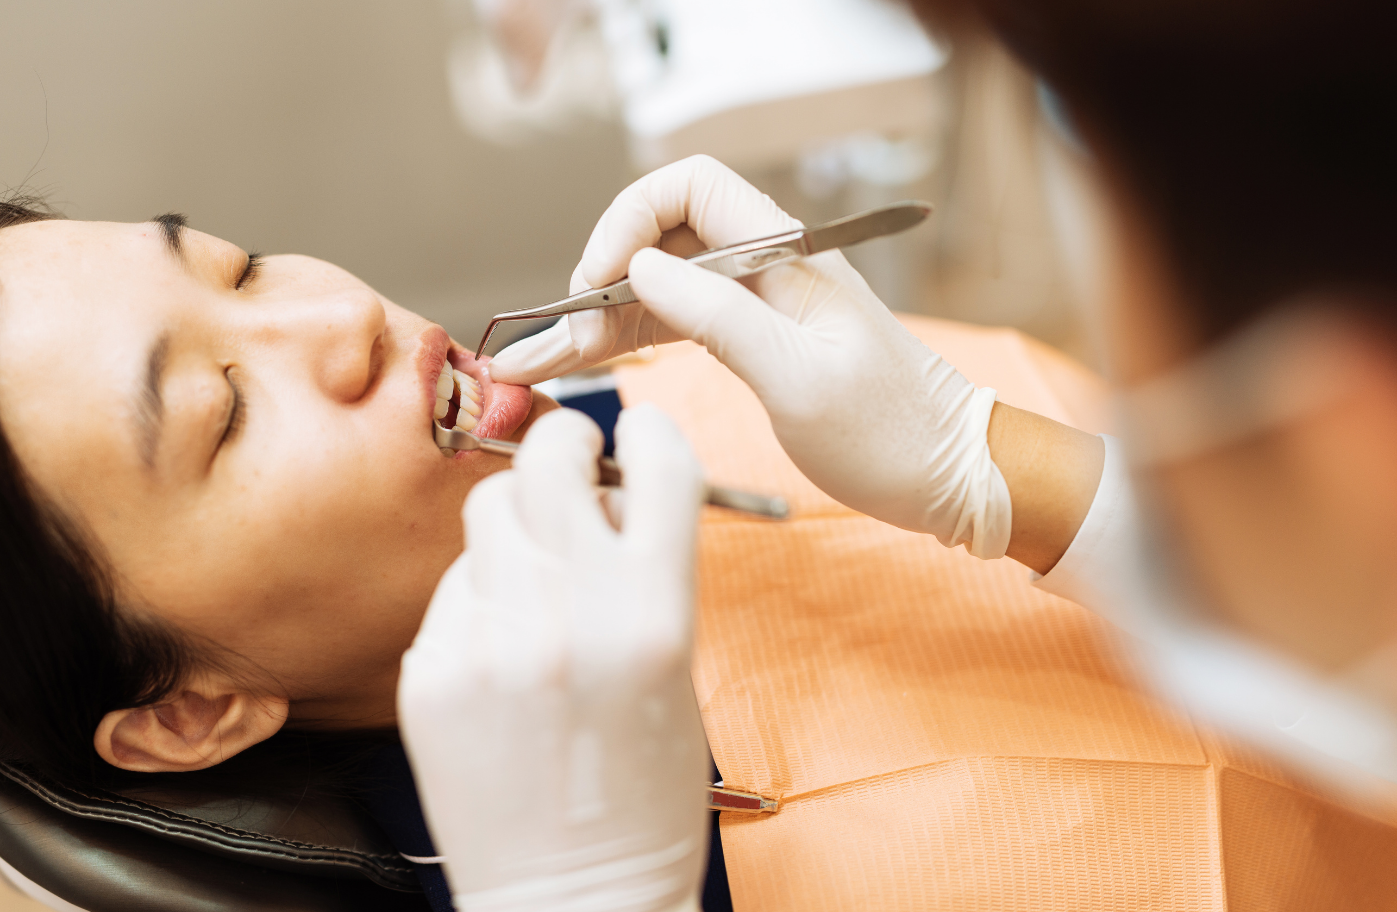 dental hygienist scaling patients teeth to remove tartar